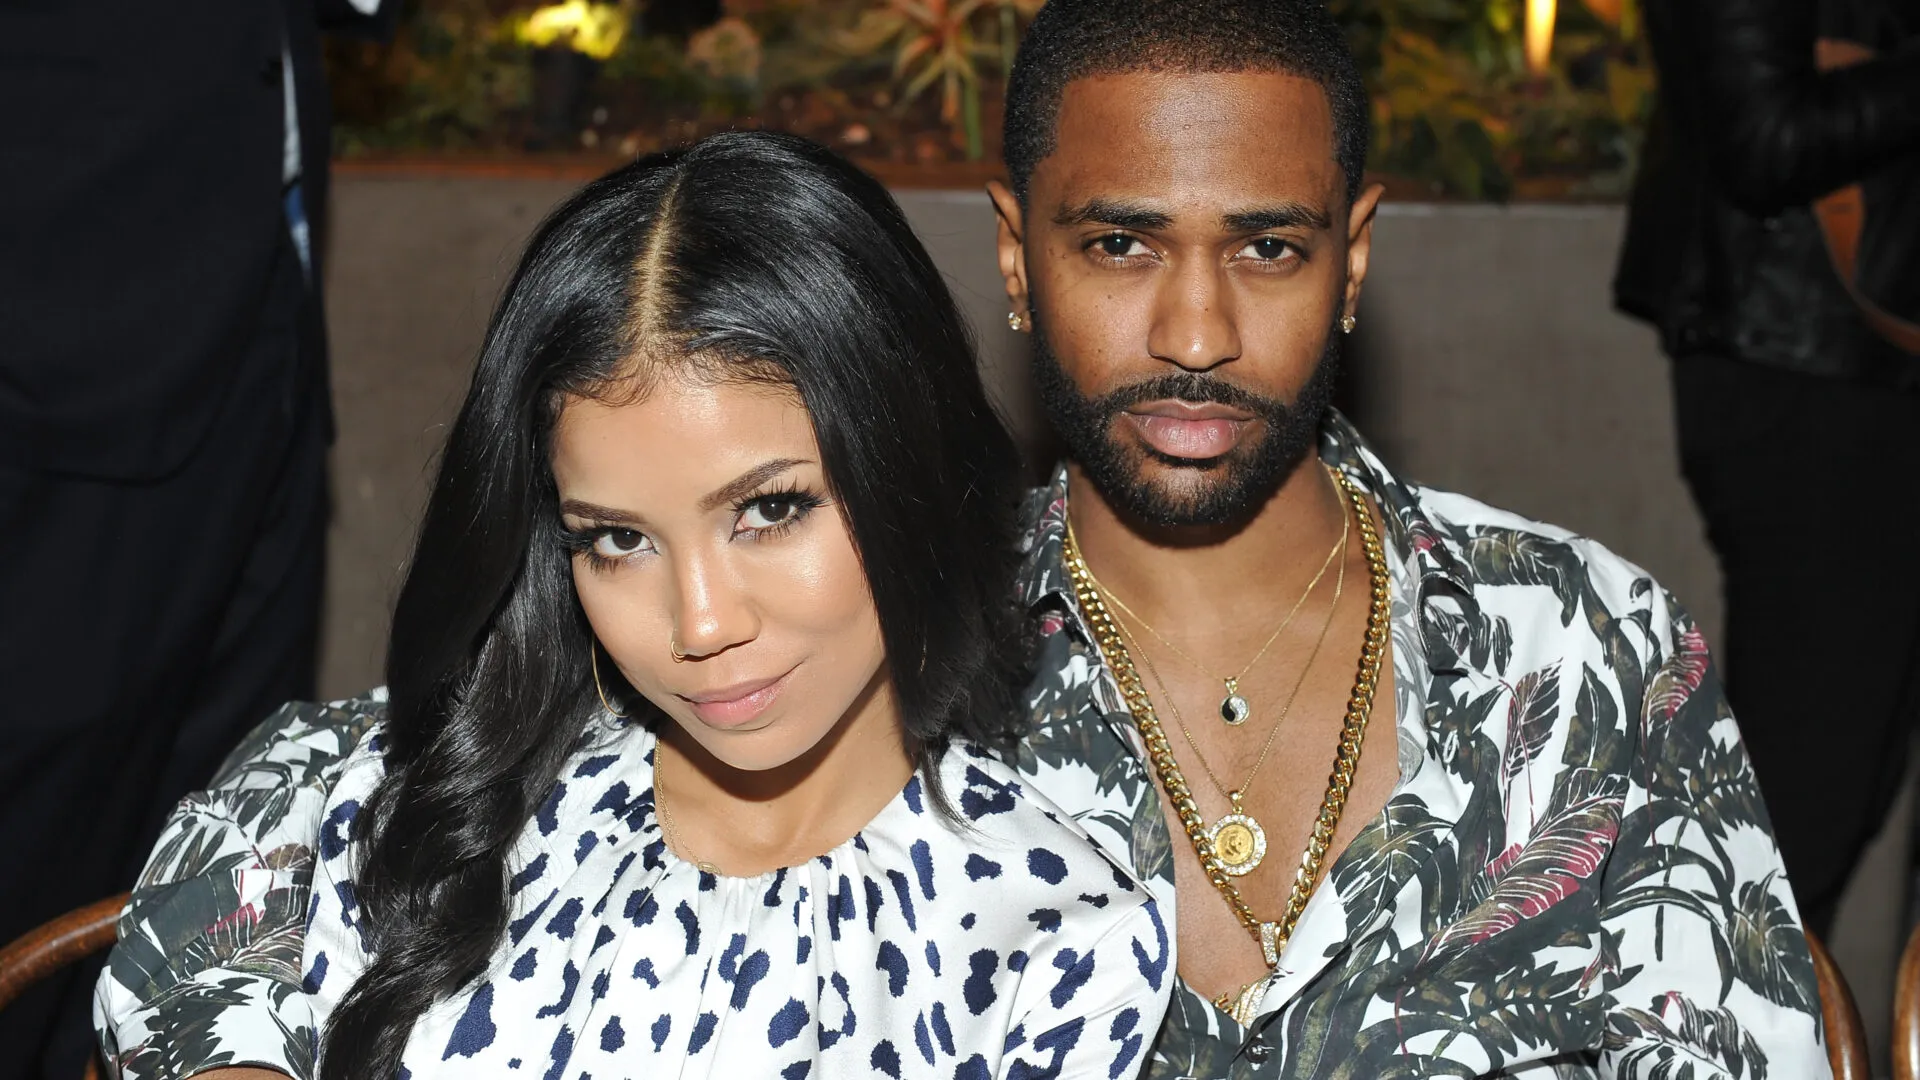 How Good Was Big Sean to Jhene Aiko in Bed?